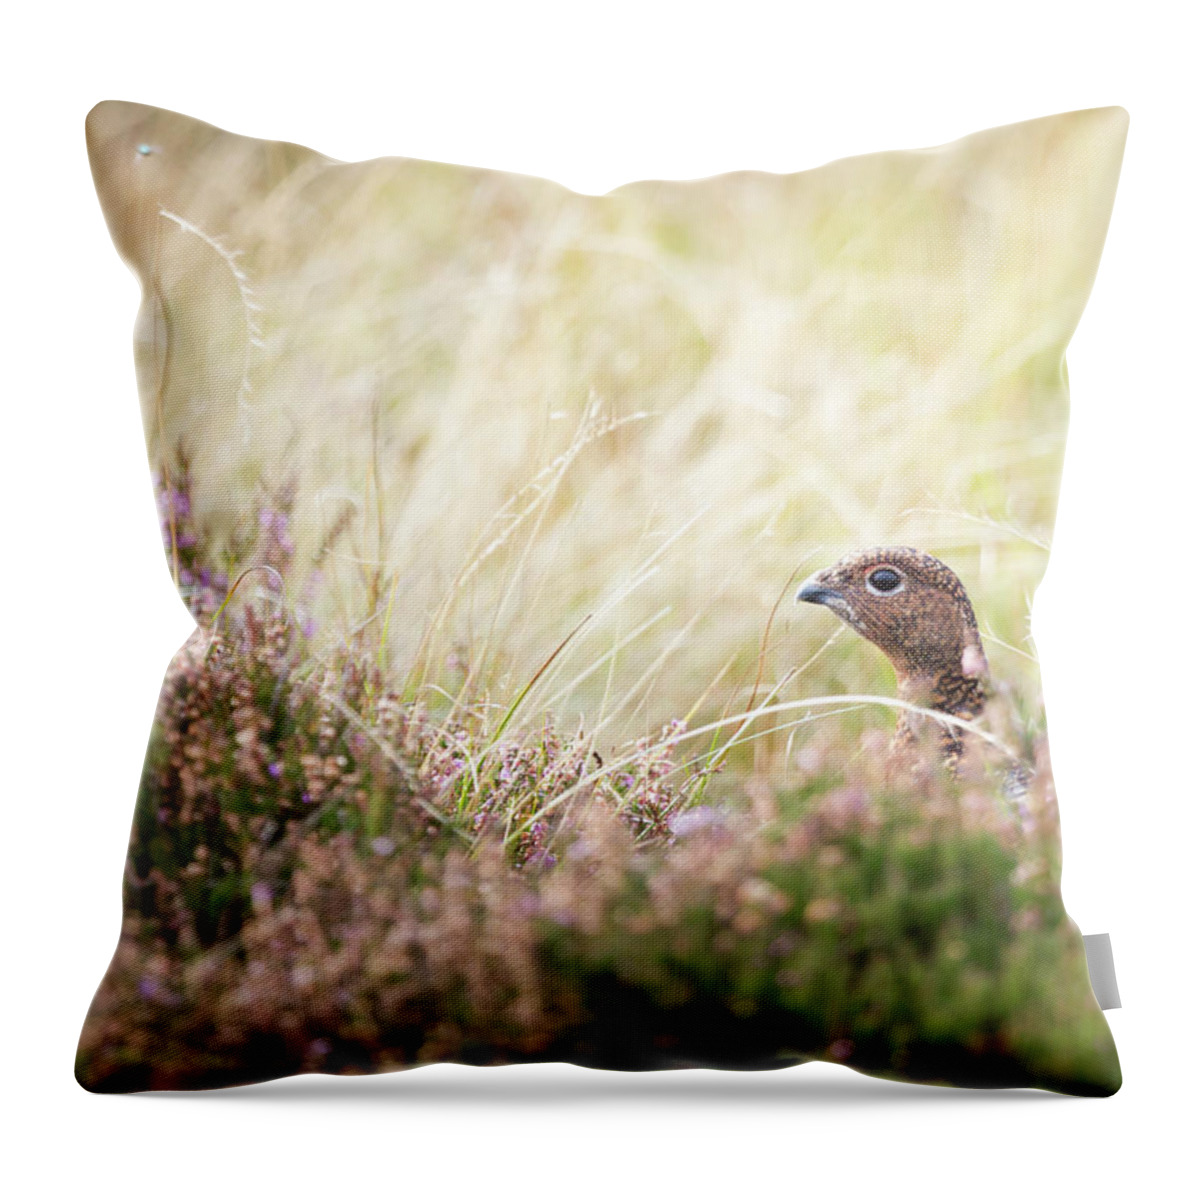 Female Red Grouse Throw Pillow featuring the photograph Red Grouse by Anita Nicholson